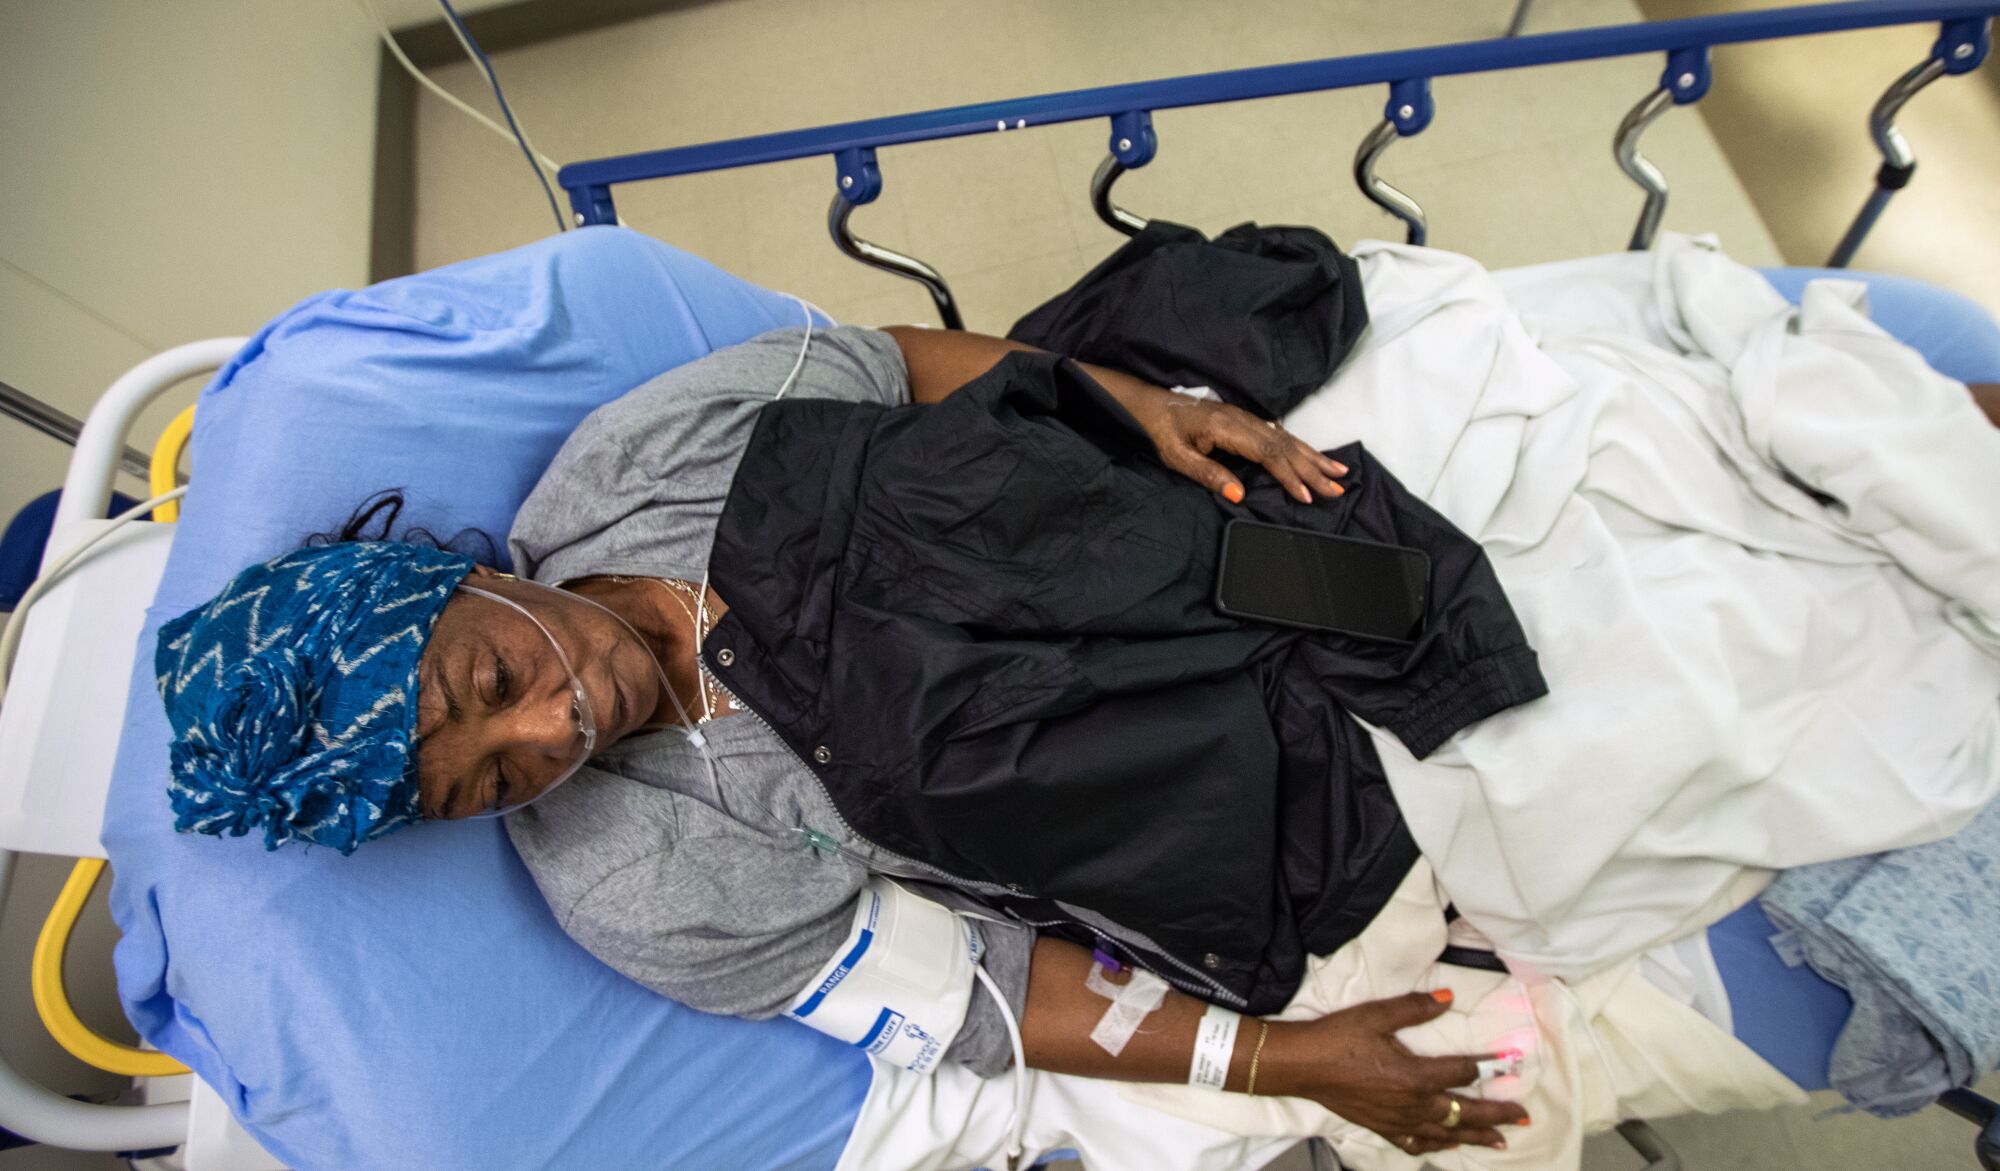 A person lying on a stretcher at the hospital